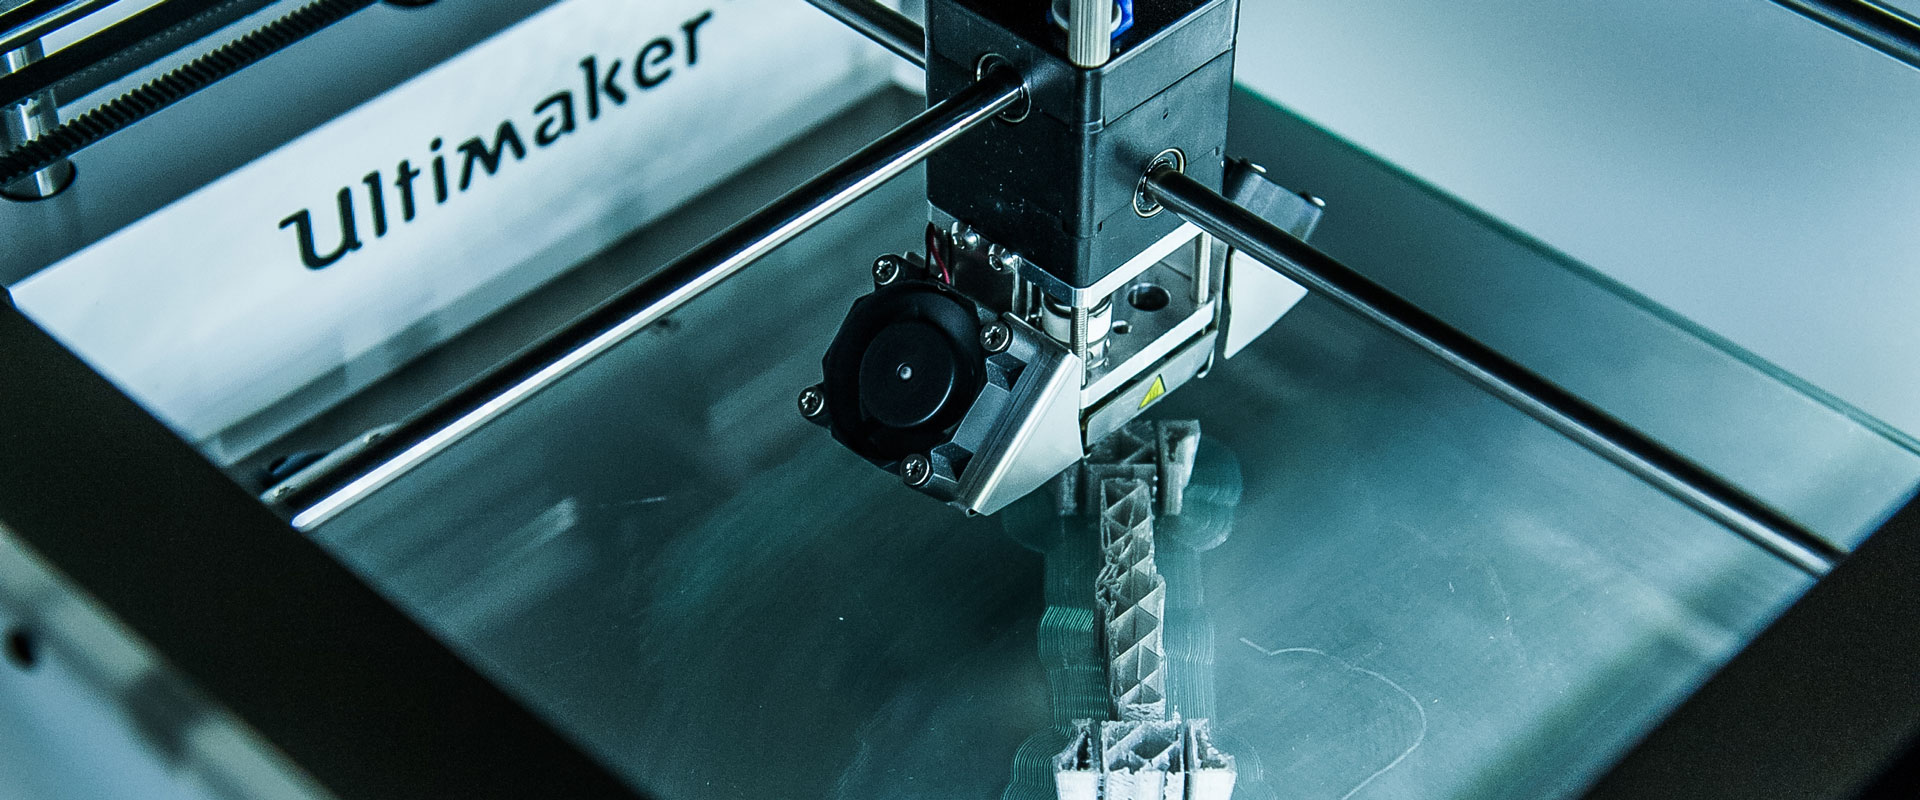 The ultimate technology in use: 3D printing